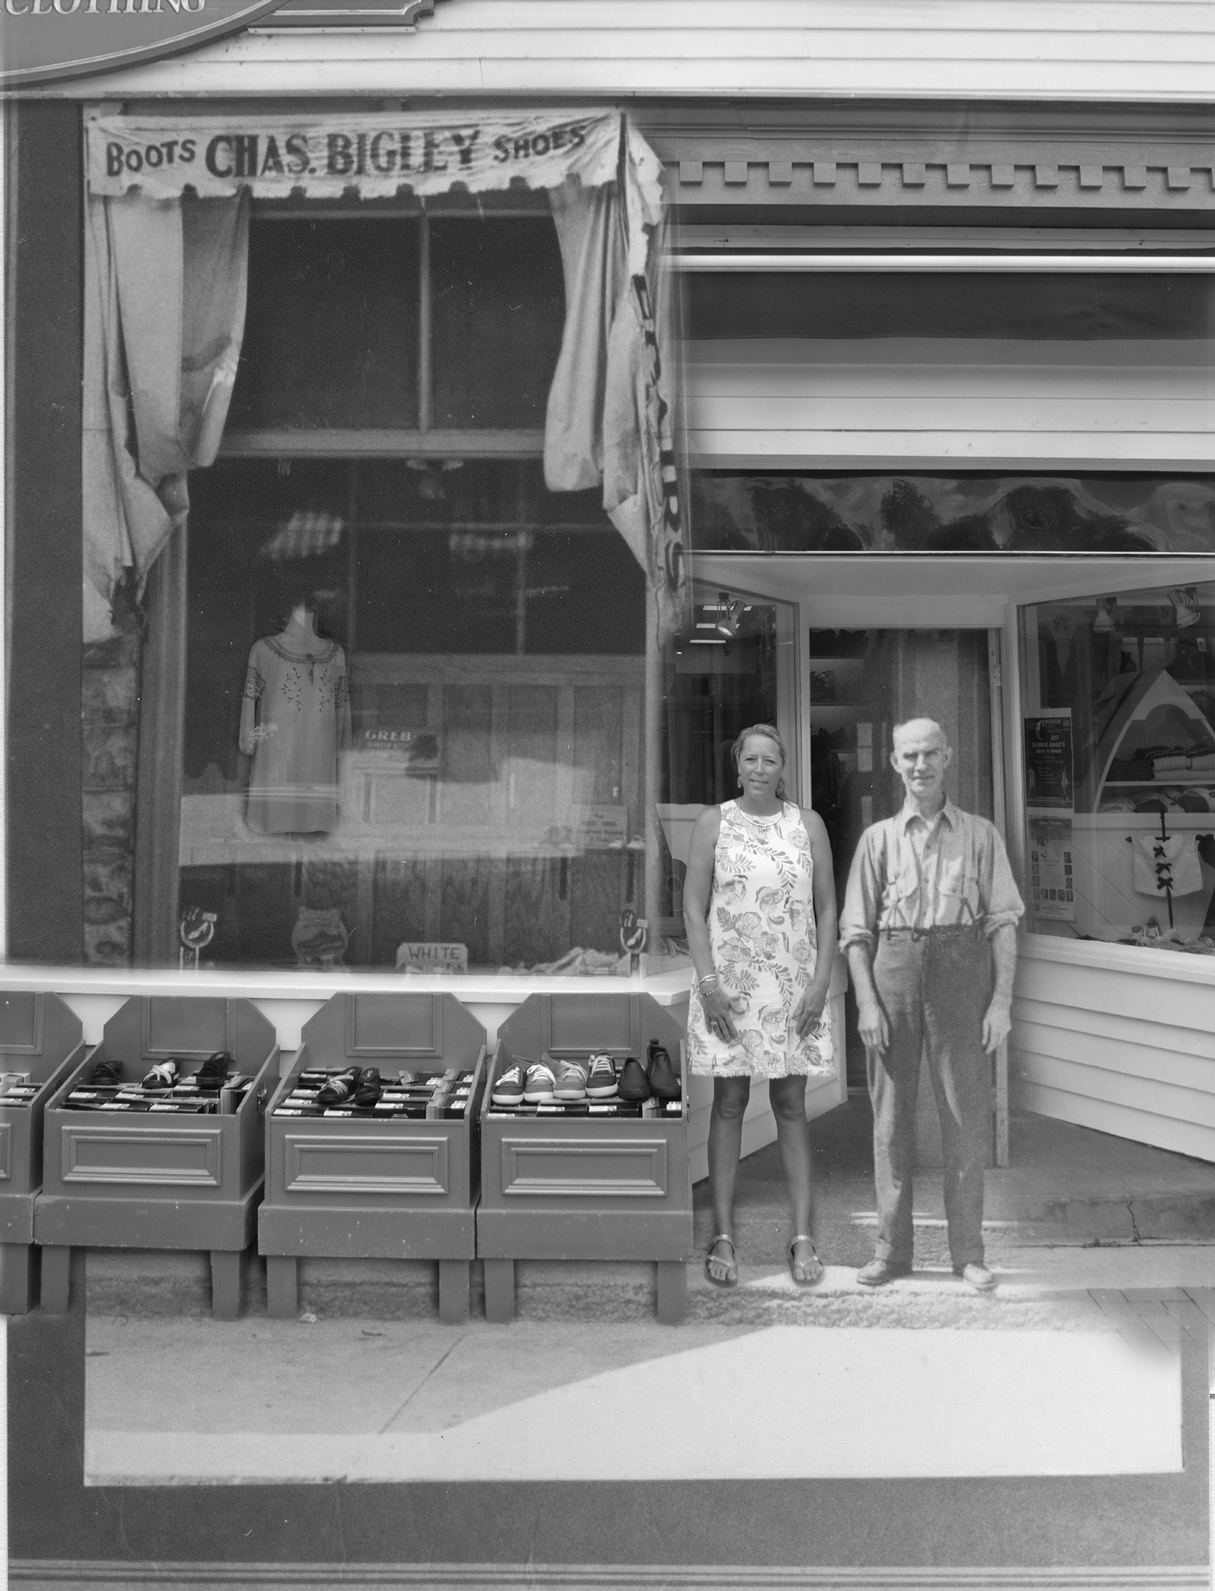 A contemporary photograph of a shoe store owner superimposed on a image of the original shop. and owner.